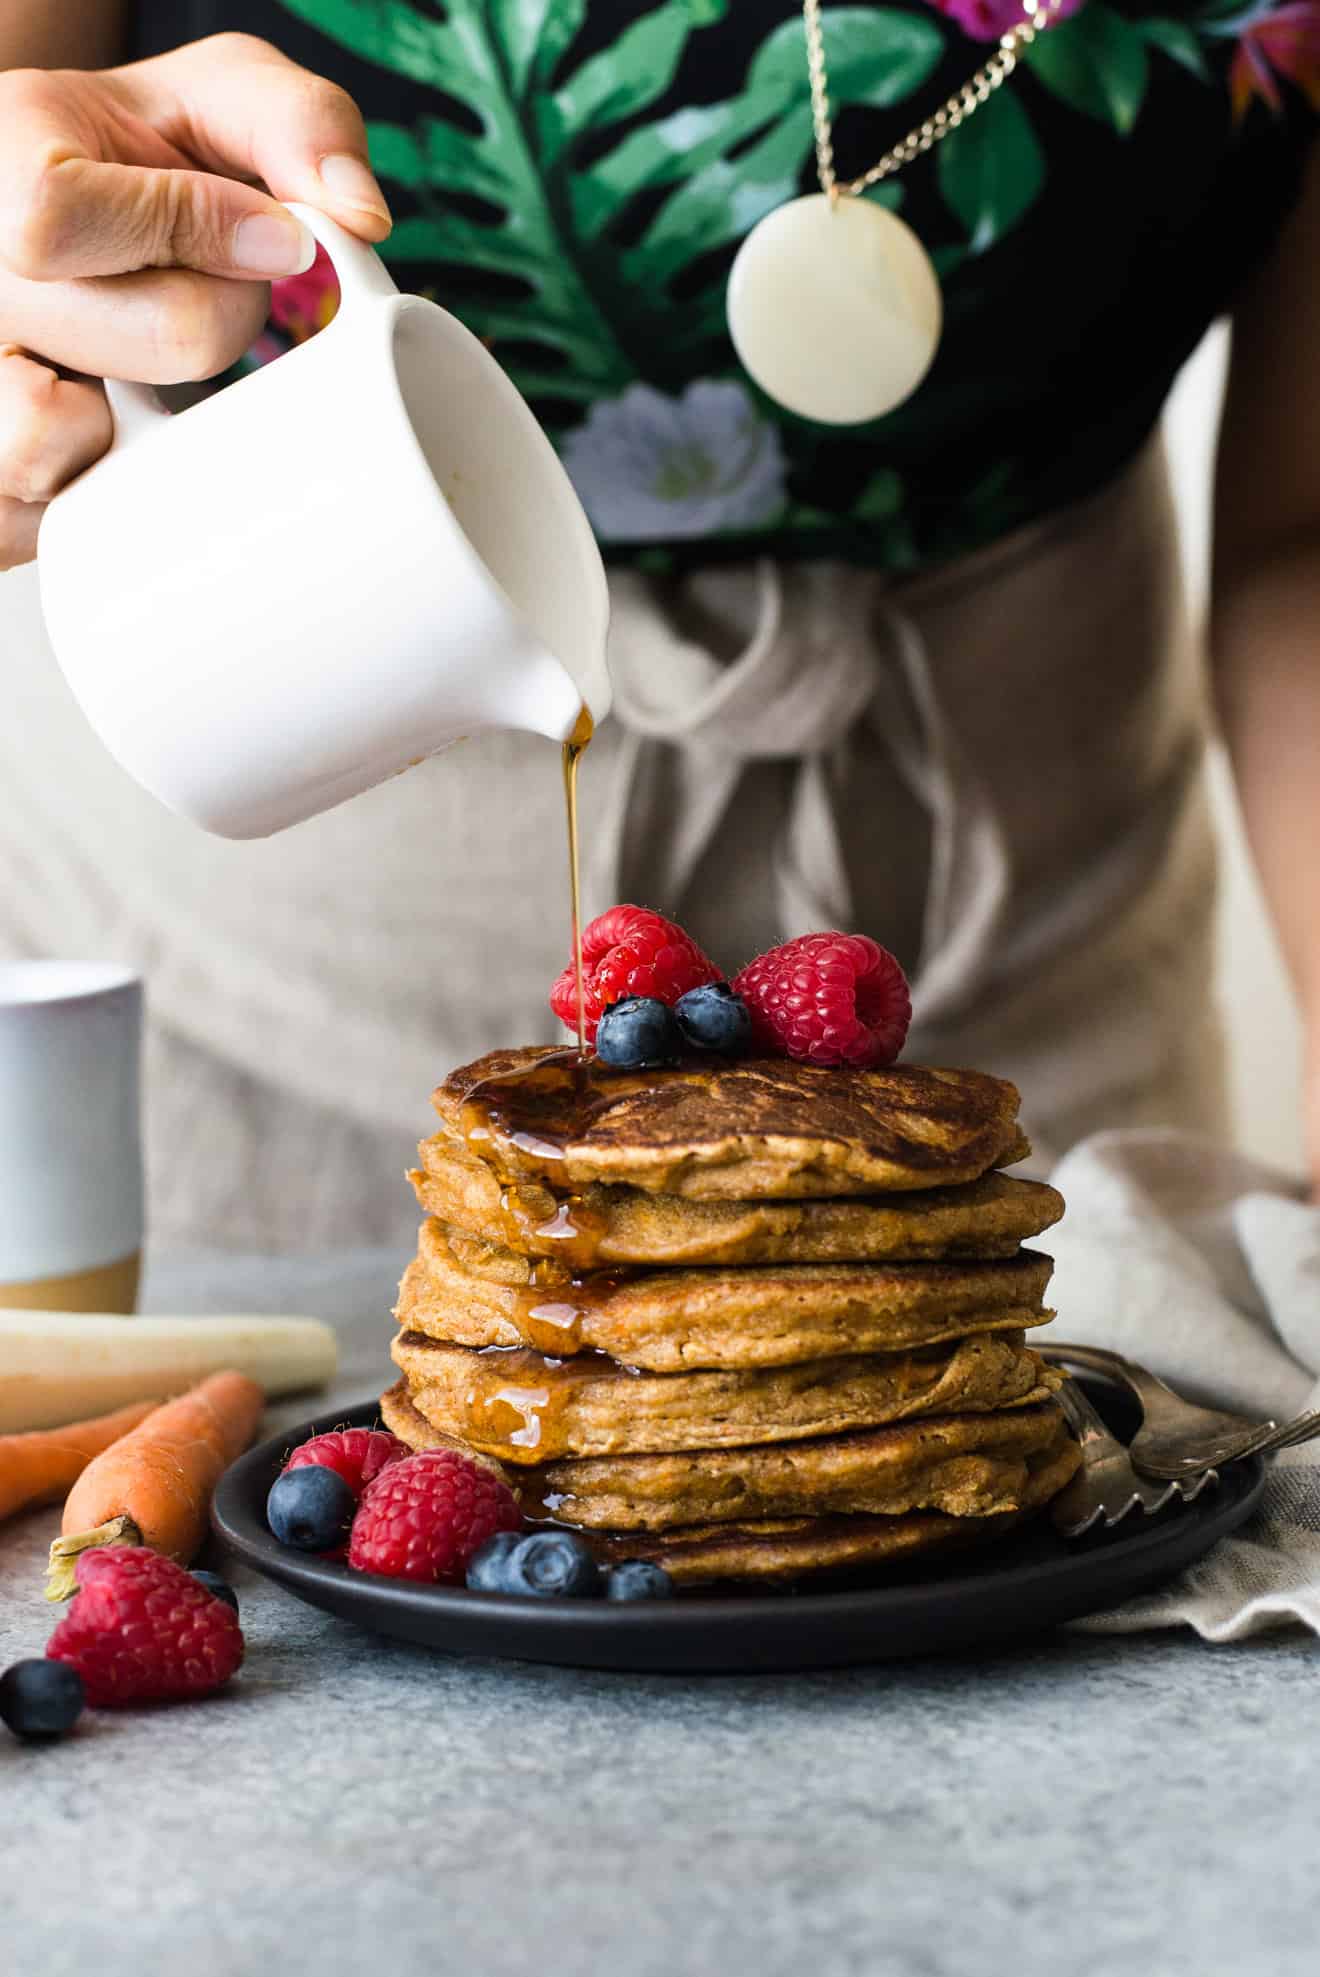 GLUTEN-FREE Oat Flour Pancakes with Carrots and Parsnips - sneak in more vegetables with these healthy breakfast pancakes!